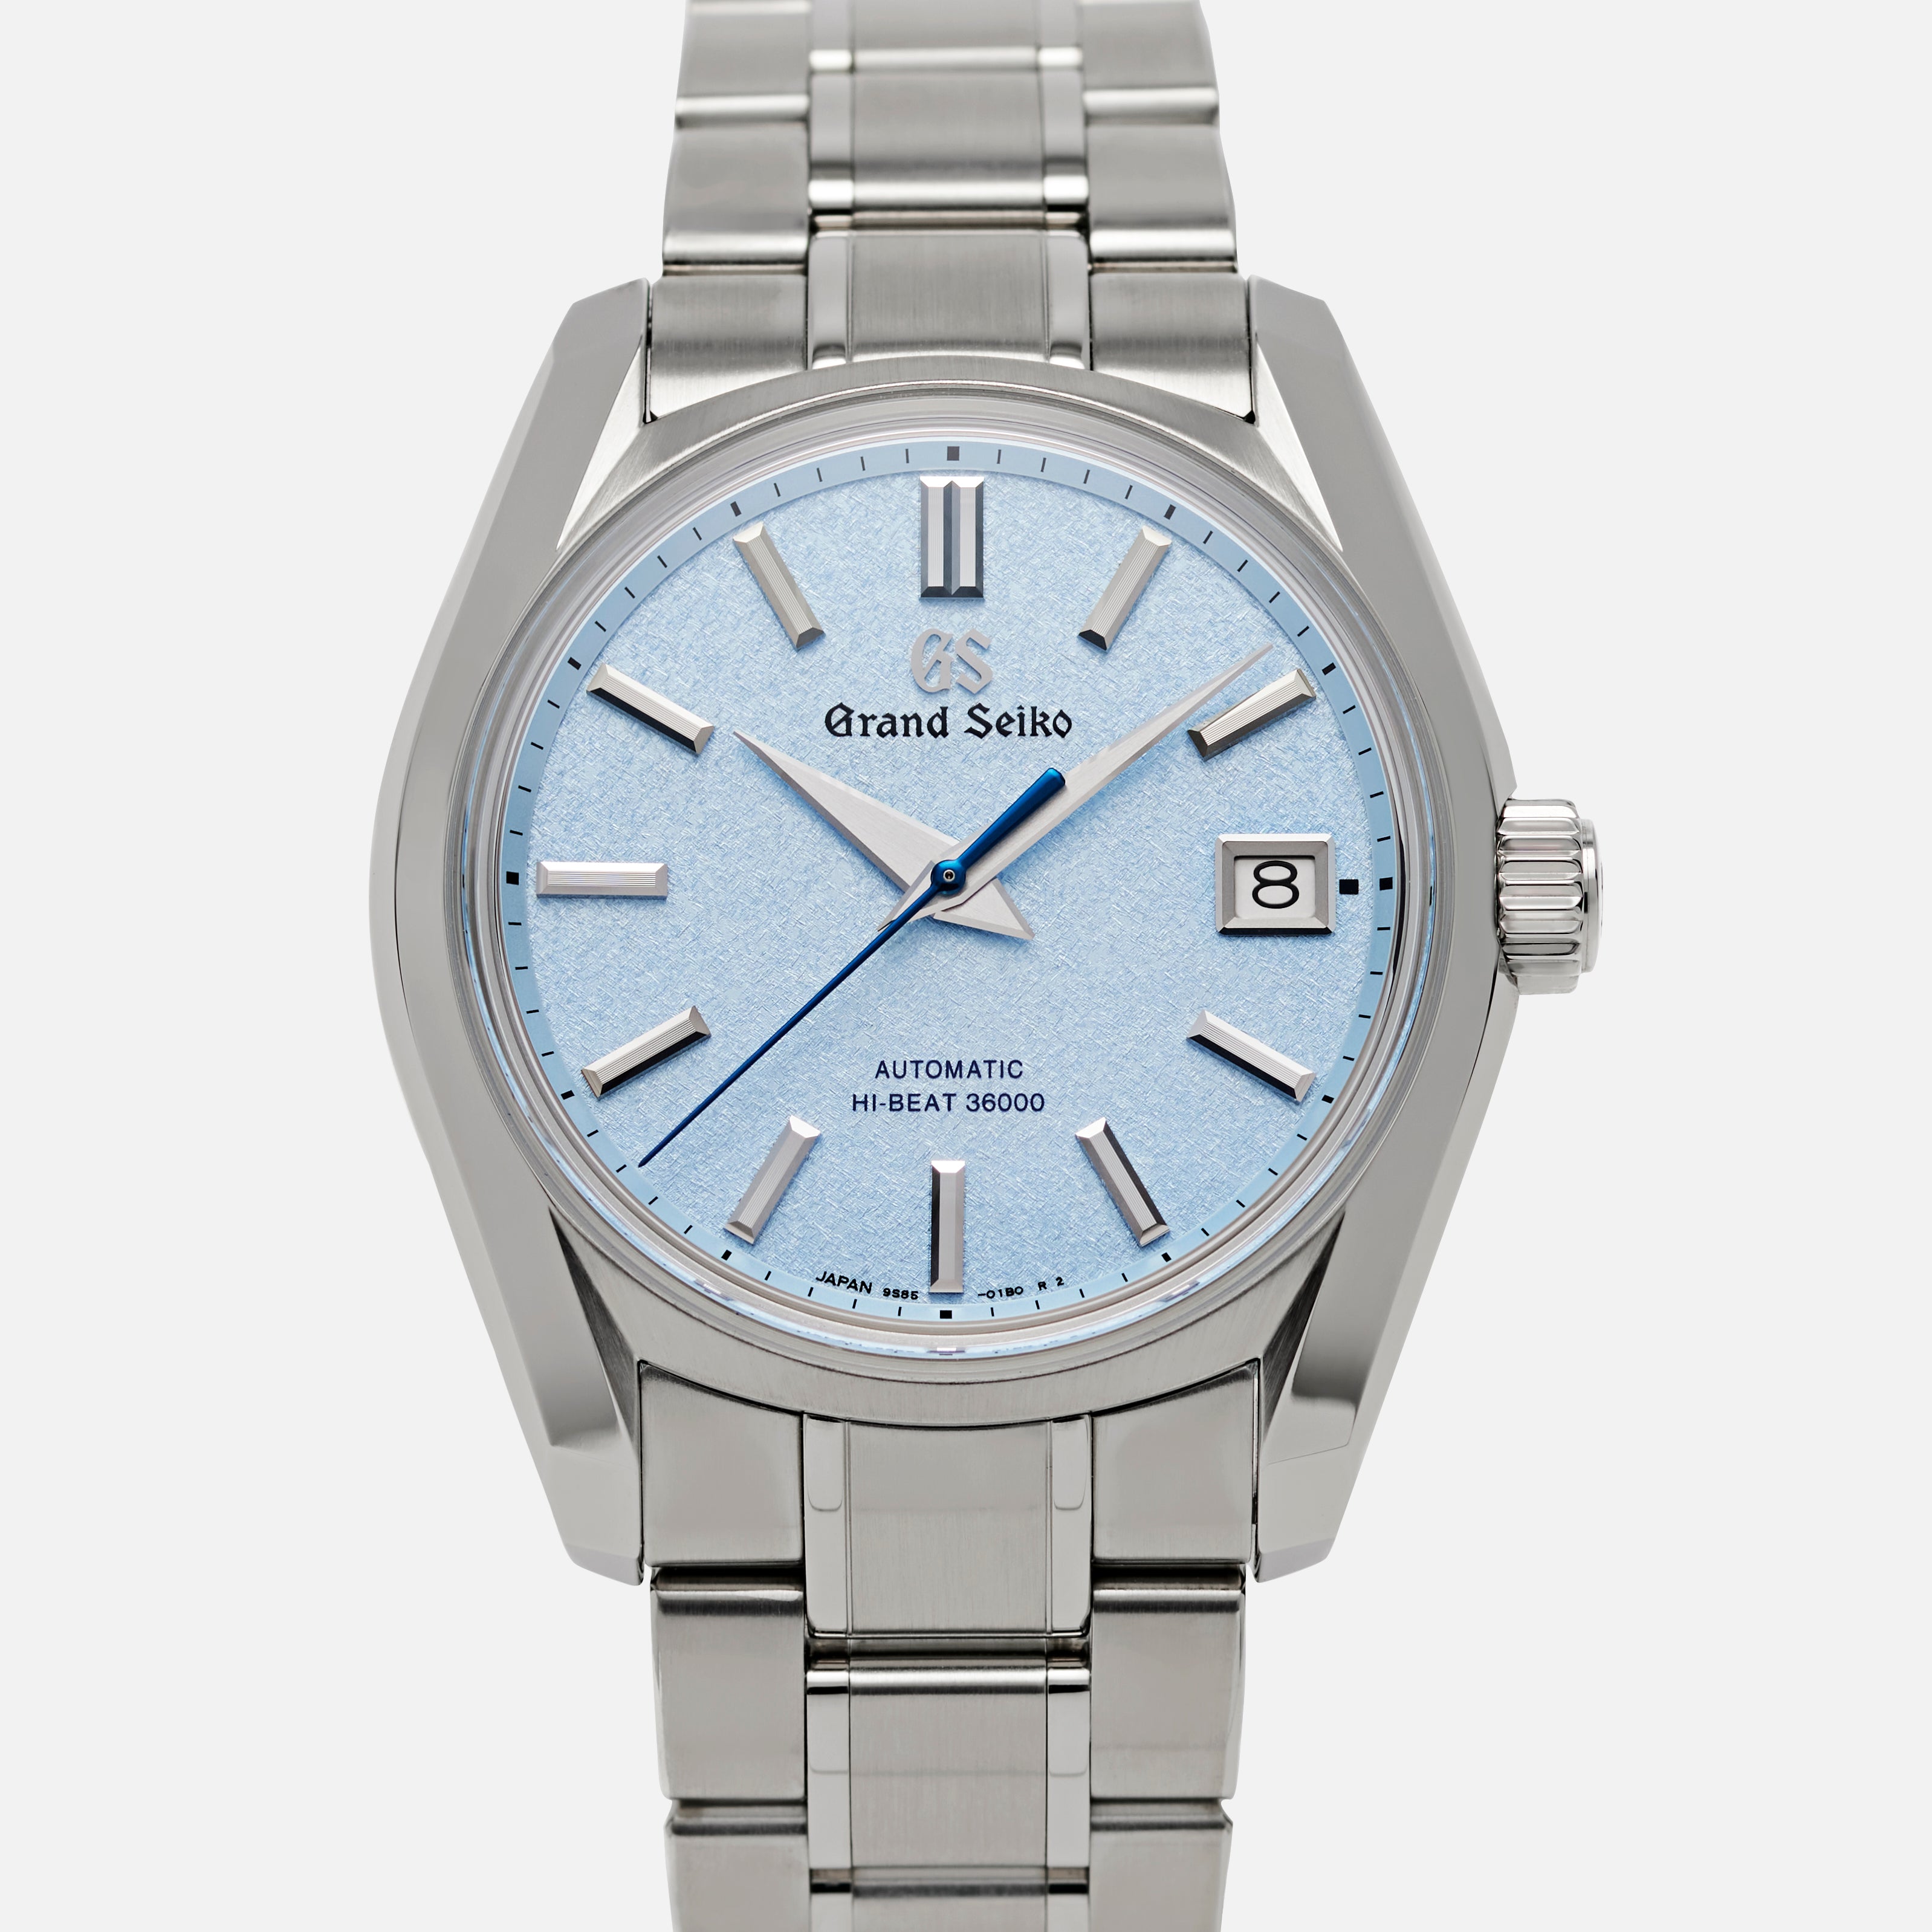 Image of Grand Seiko 'Soko' 2022 US Special Edition 'Frost' Hi-Beat 36,000